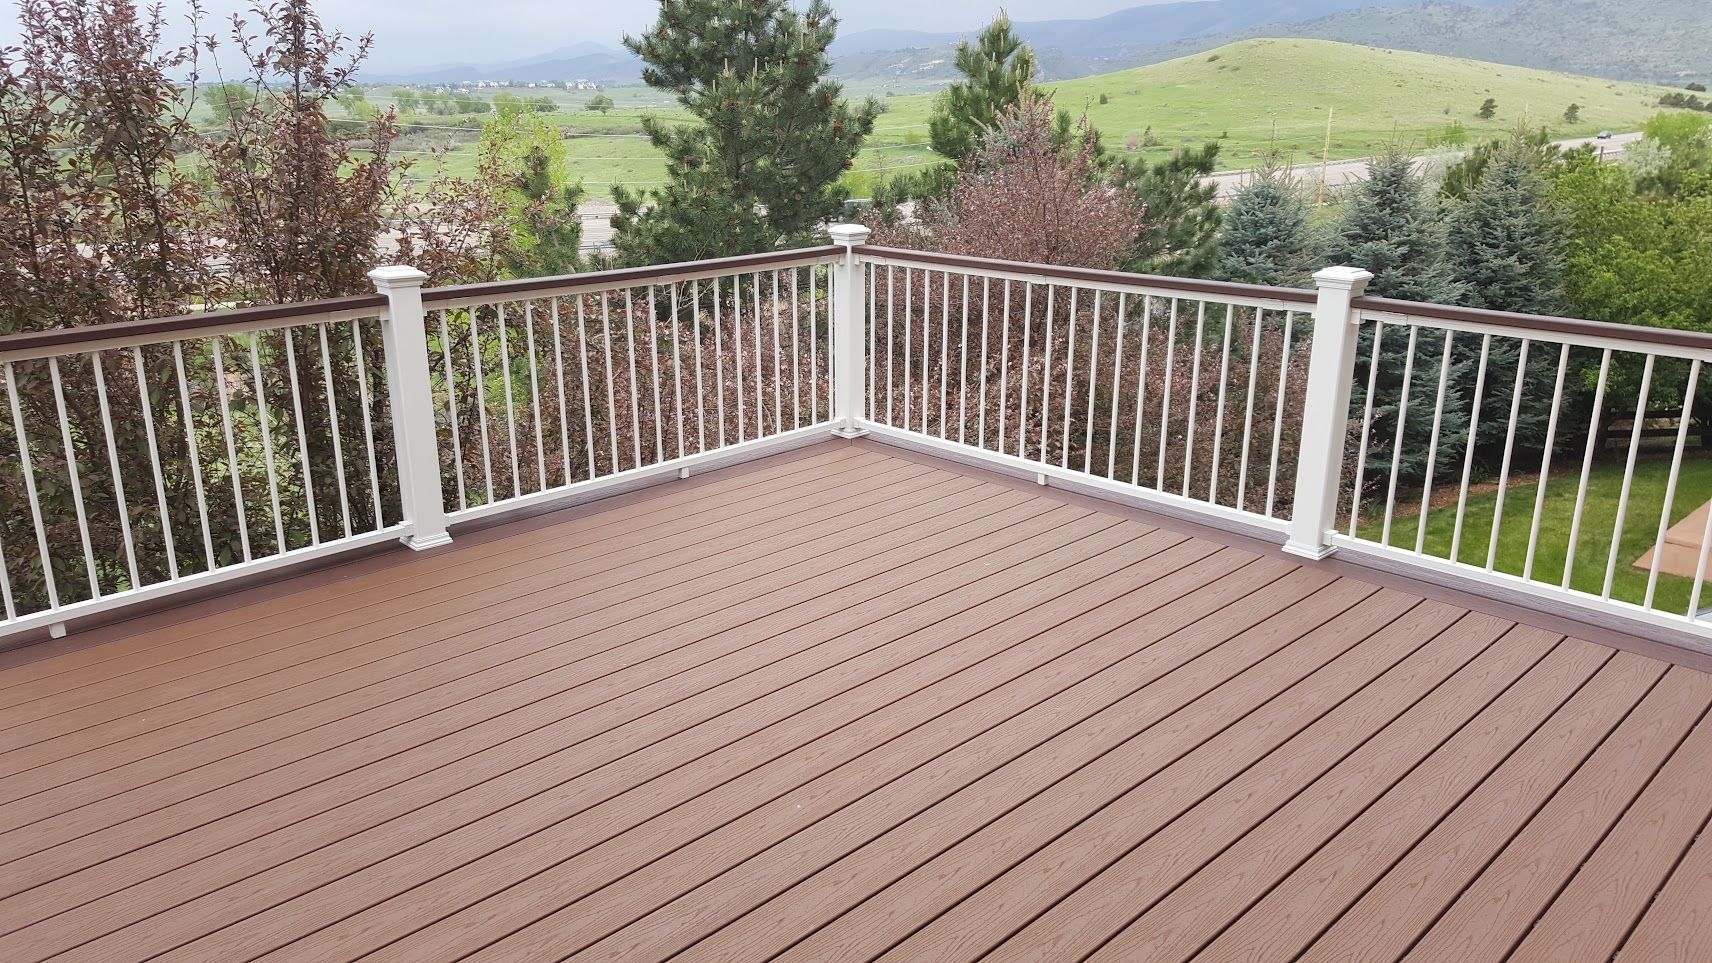 A wooden deck with a white railing and a view of the mountains.